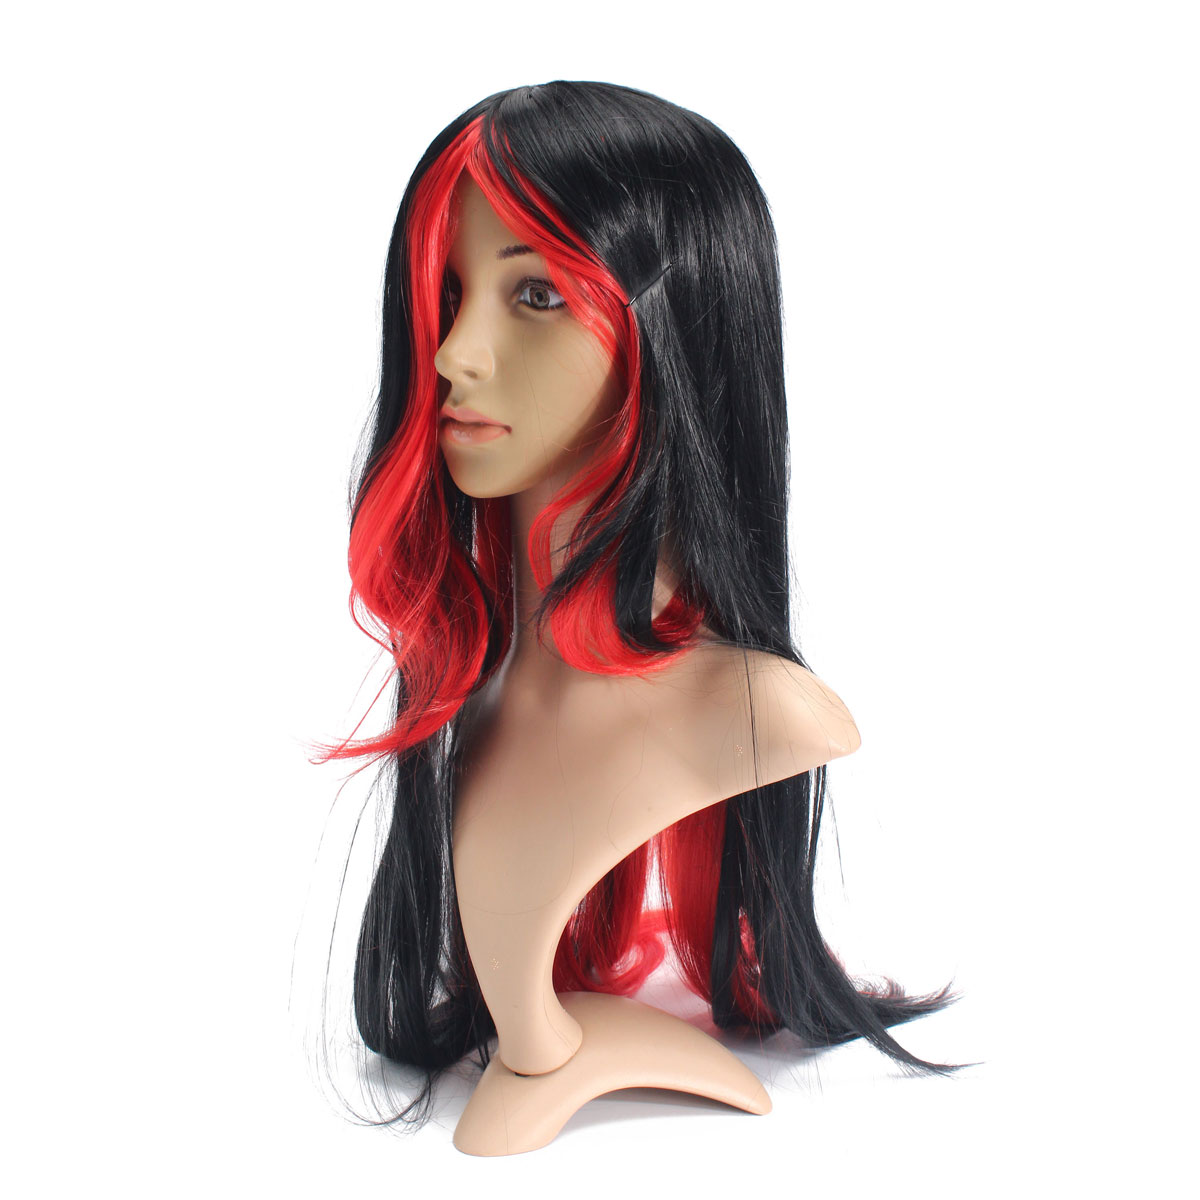 70cm-Black-Red-Mixed-Color-Long-Straight-Wavy-Bangs-Women-Cosplay-Wigs-Side-Bang-1062098